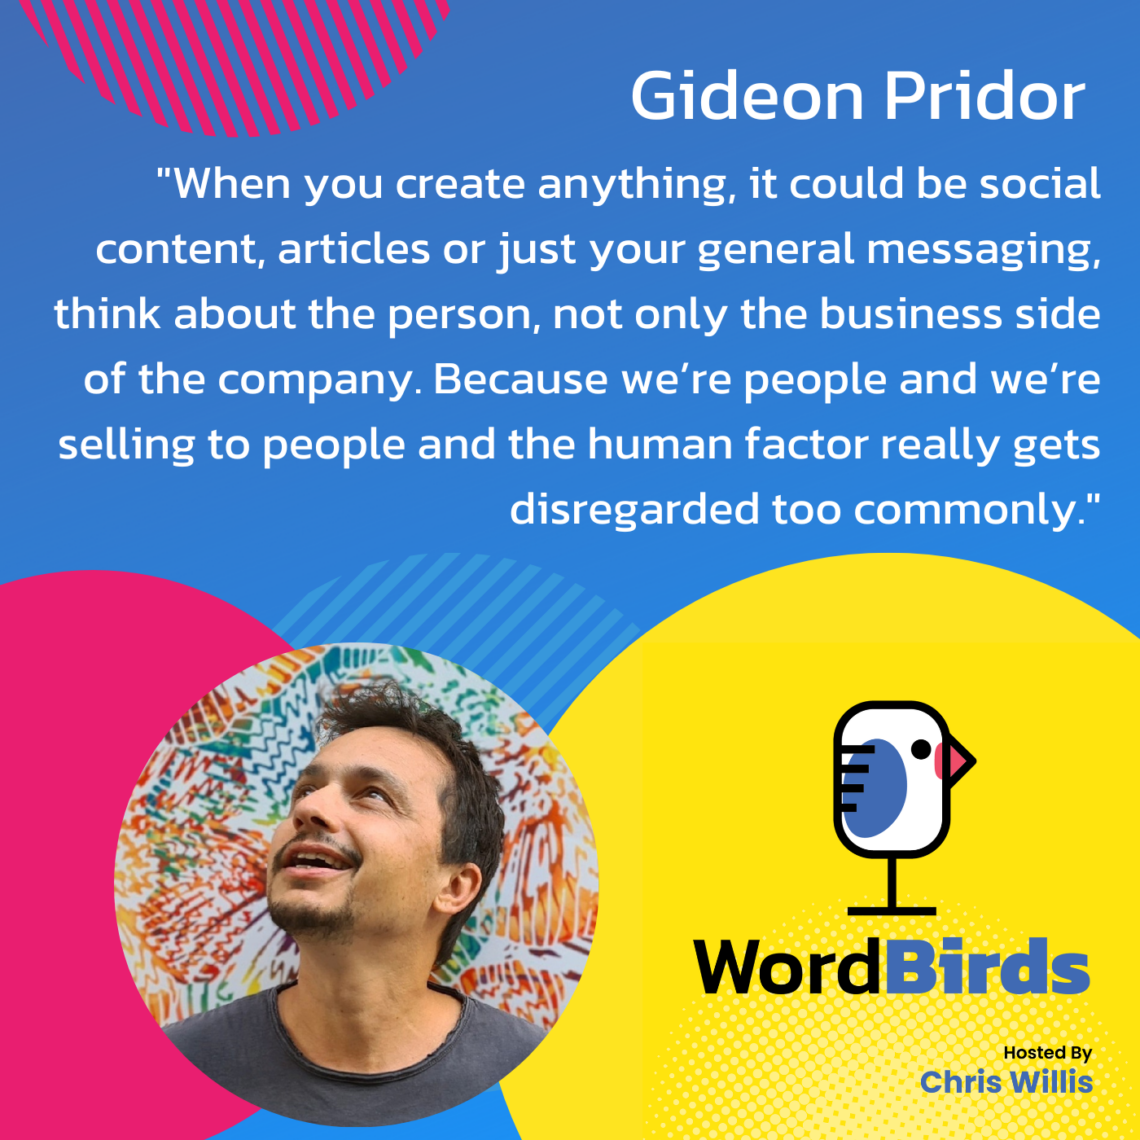 On a blue background there's a quote from Gideon Pridor in white that takes up the majority of the image. The bottom of the image has a headshot image of Gideon and the WordBirds Podcast logo.